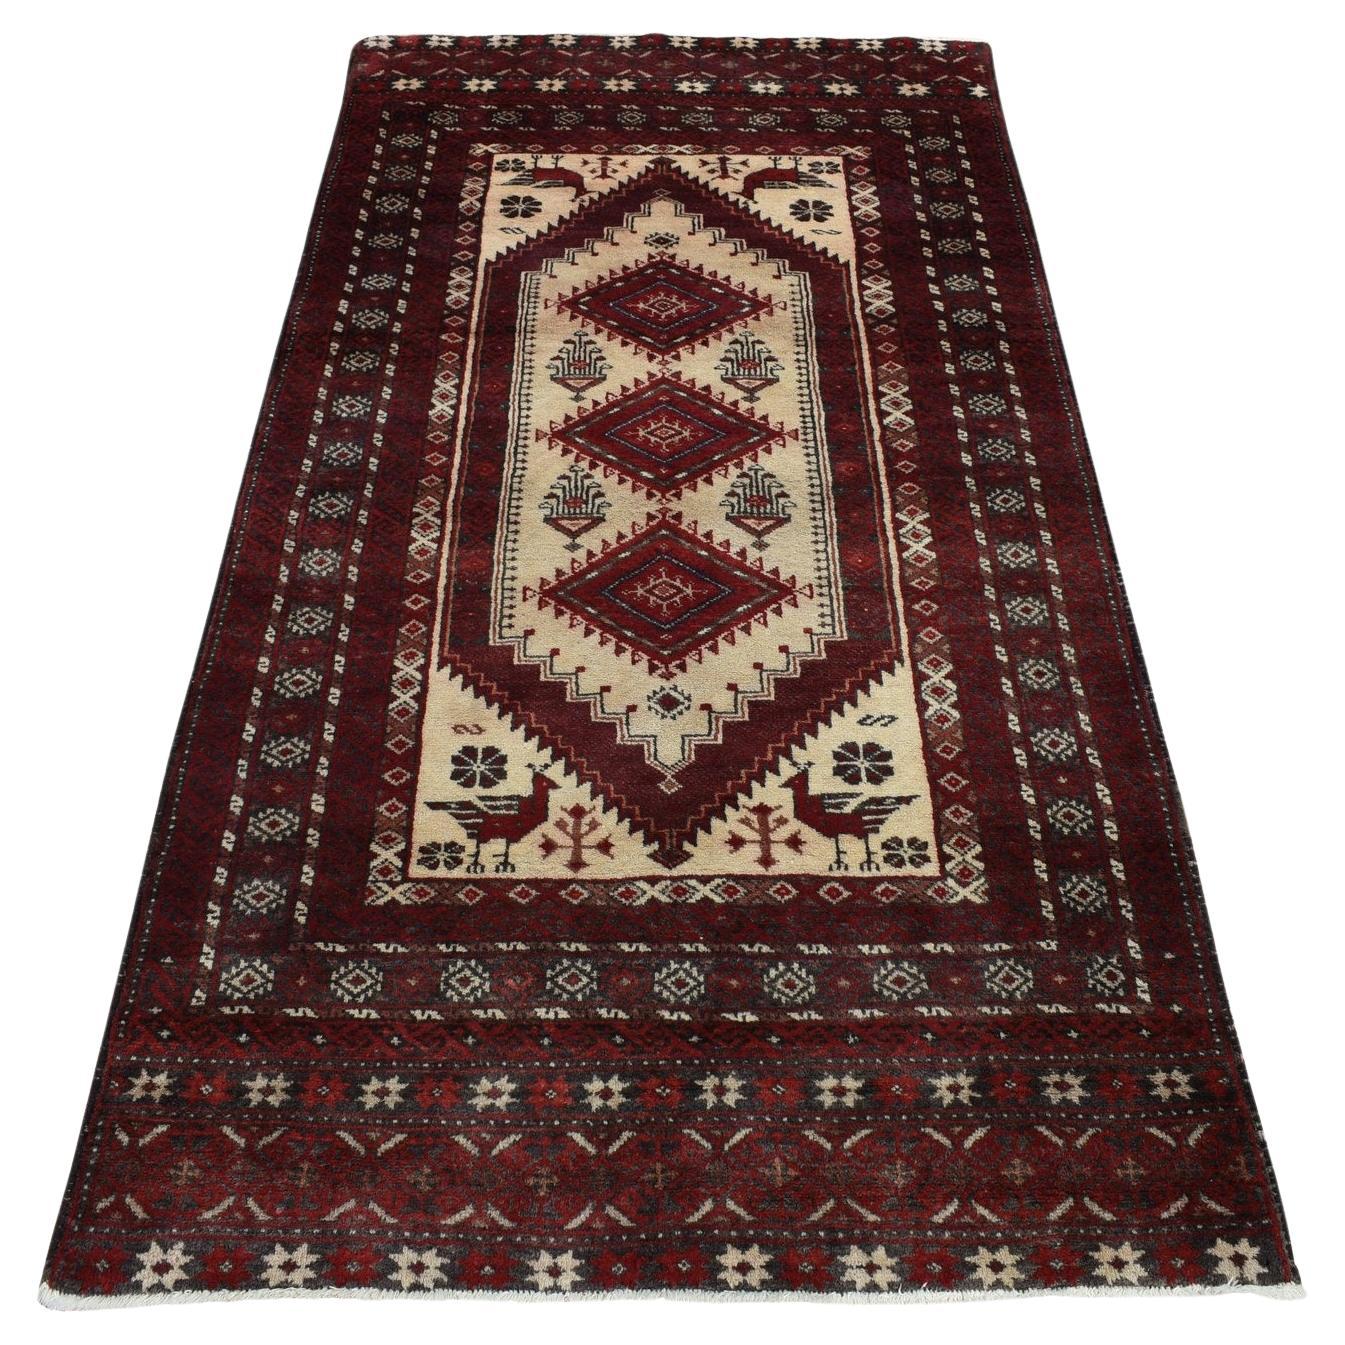 Red Old Persian Baluch Geometric Pure Wool Hand Knotted Full Pile Rug 3'7"x7'1"